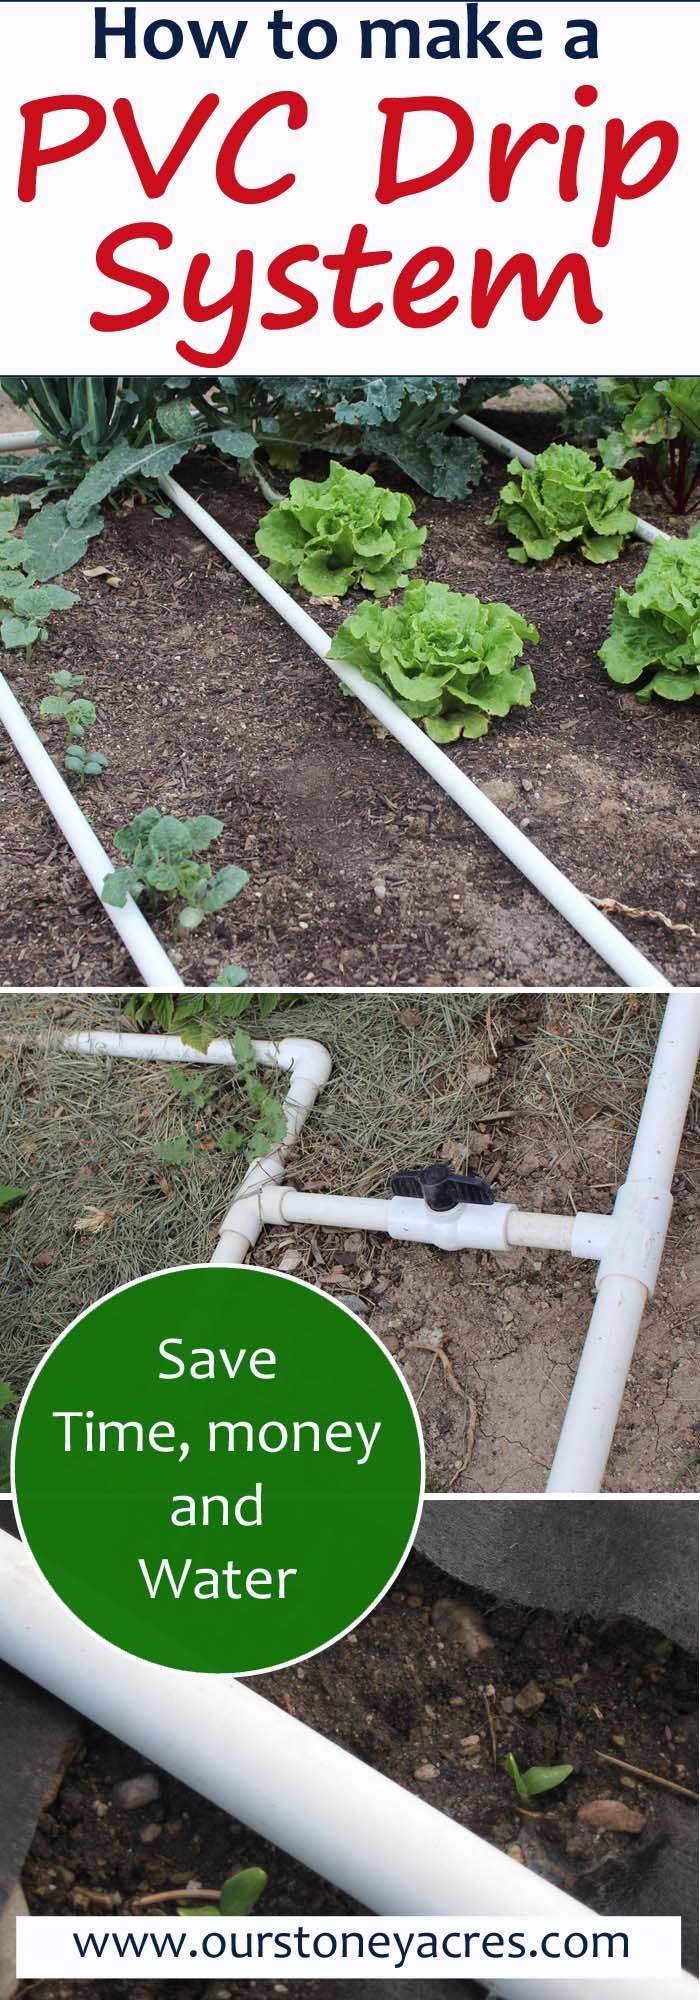 PVC Drip Irrigation is an inexpensive and easy to build method for watering your backyard garden.  After adding a PVC drip